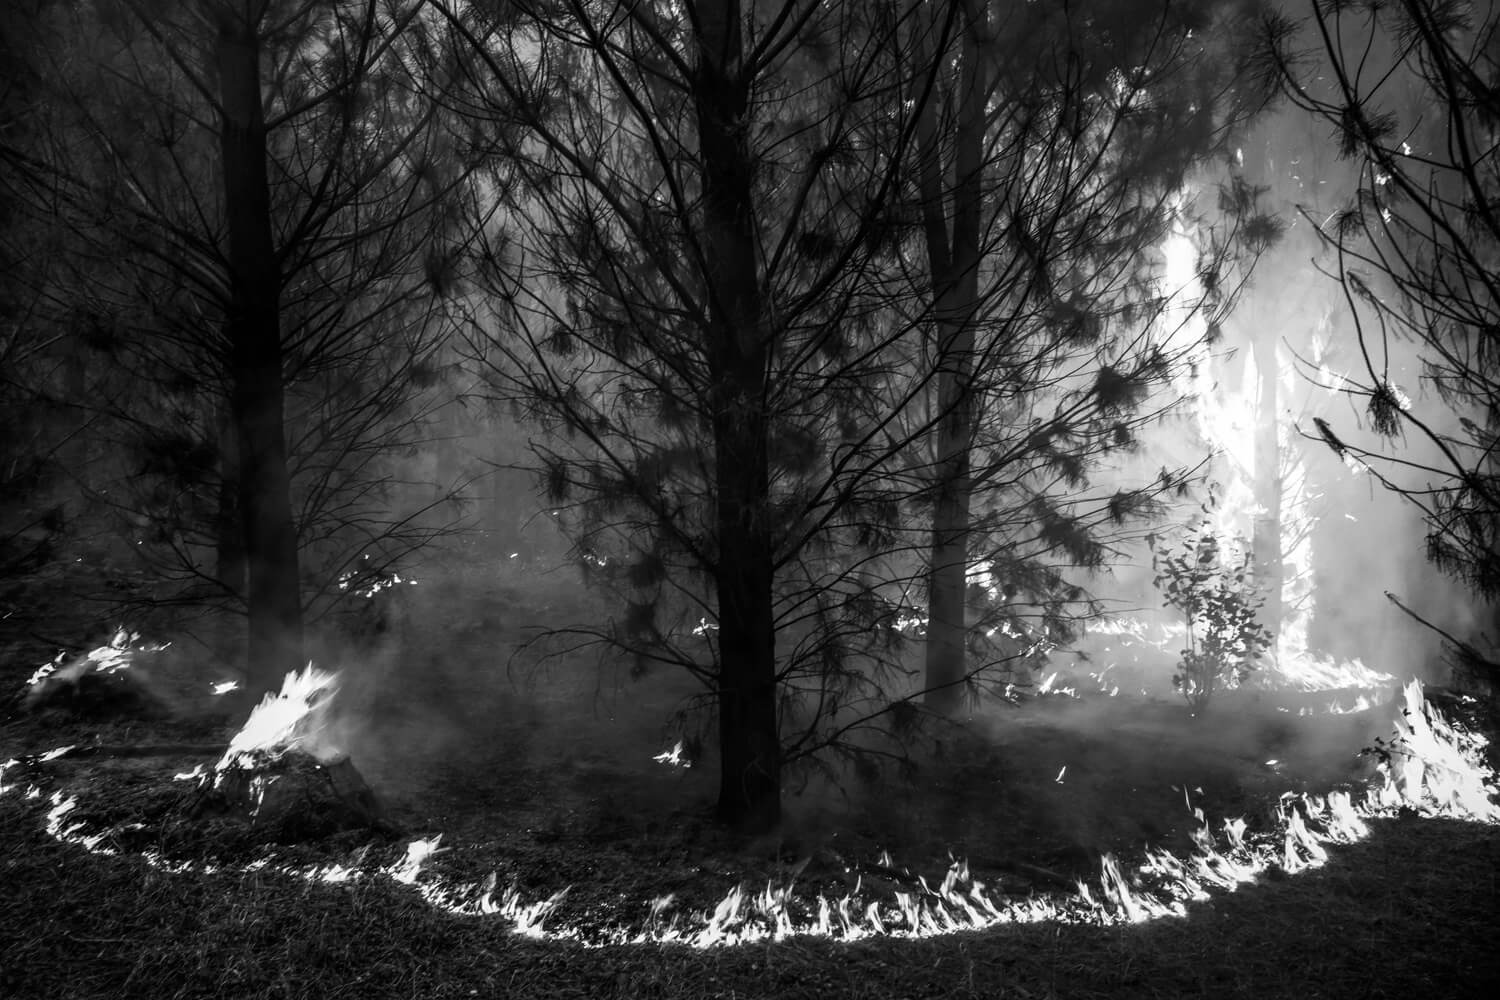 A forest underbrush fire spreads, surrounding a tree as it closes in. Highlighting the quiet devastation of wildfires.